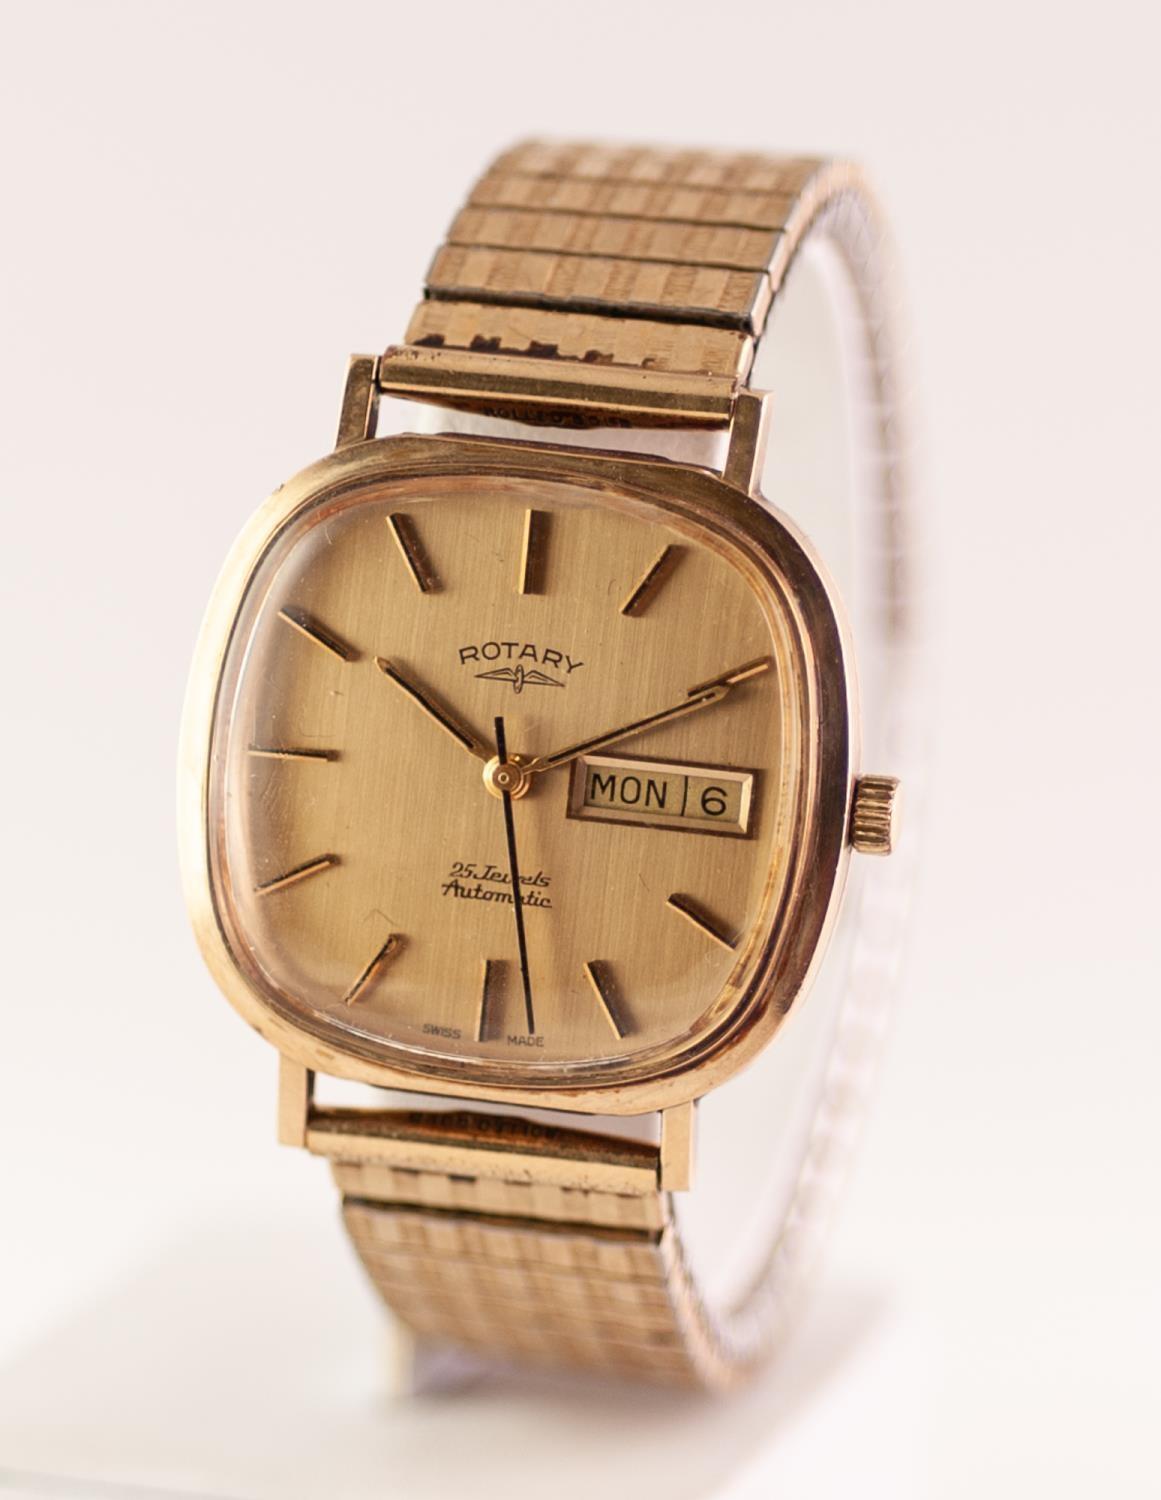 GENT'S ROTARY 9ct GOLD WRISTWATCH WITH 25 JEWELS SWISS AUTOMATIC MOVEMENT, rounded square dial